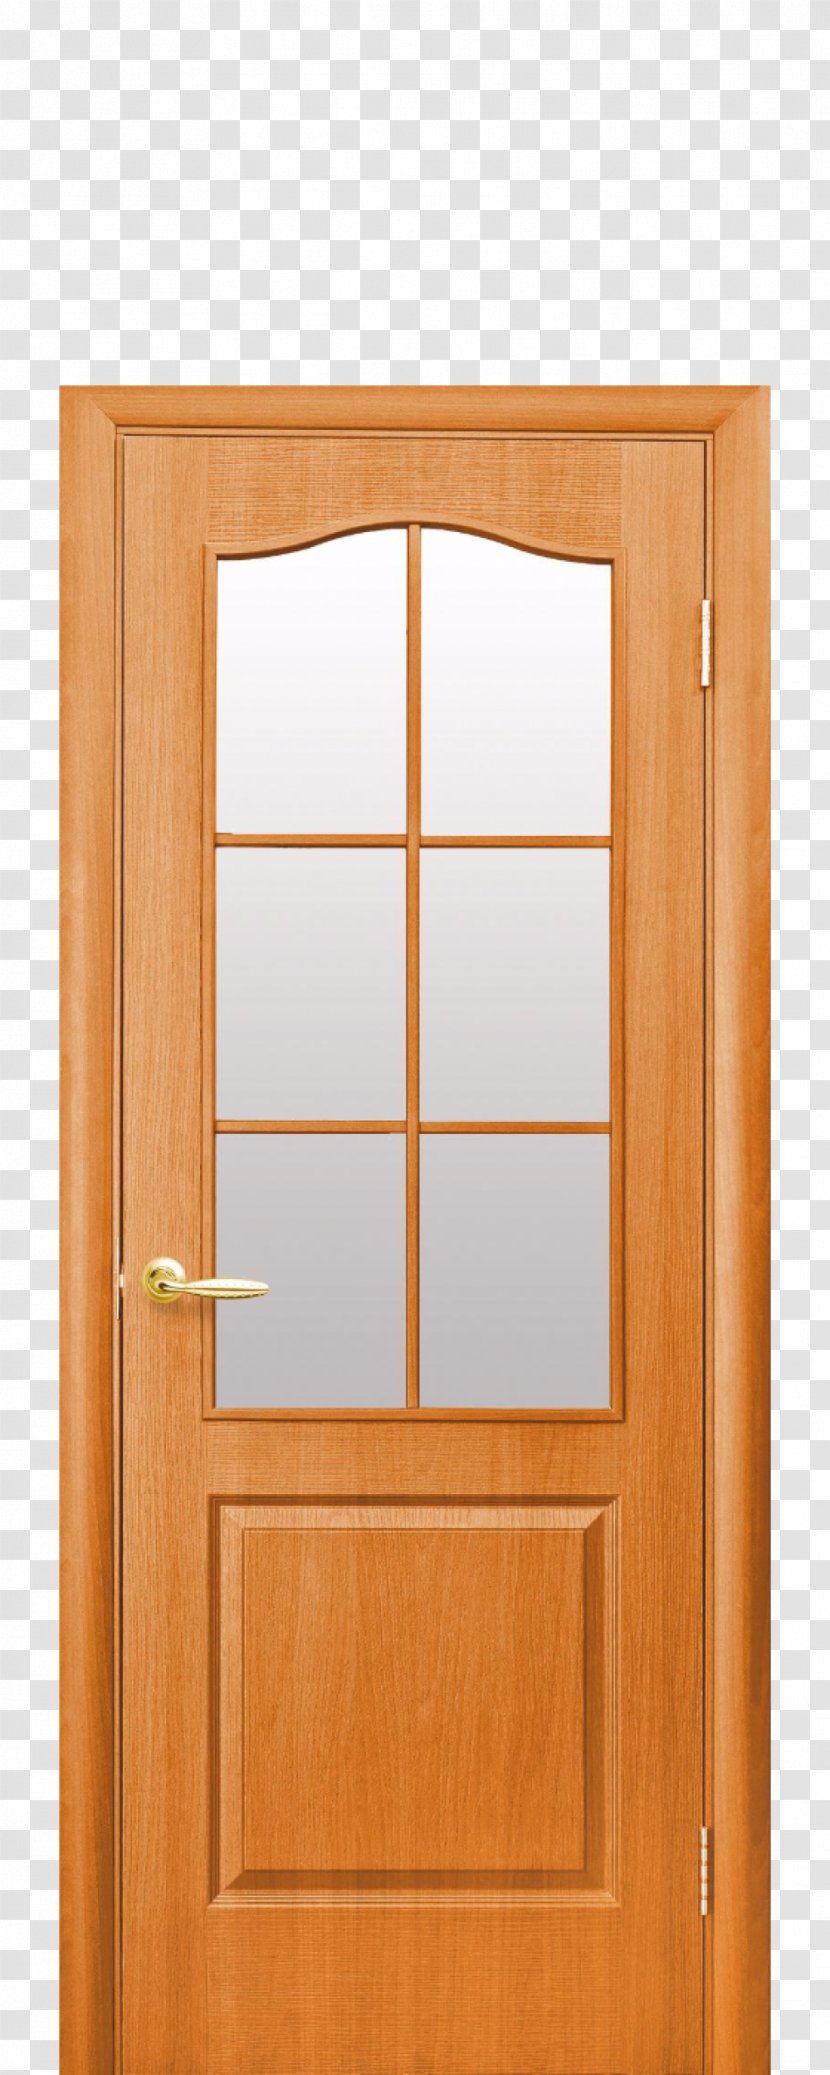 Window Door Stained Glass Laminate Flooring Transparent PNG